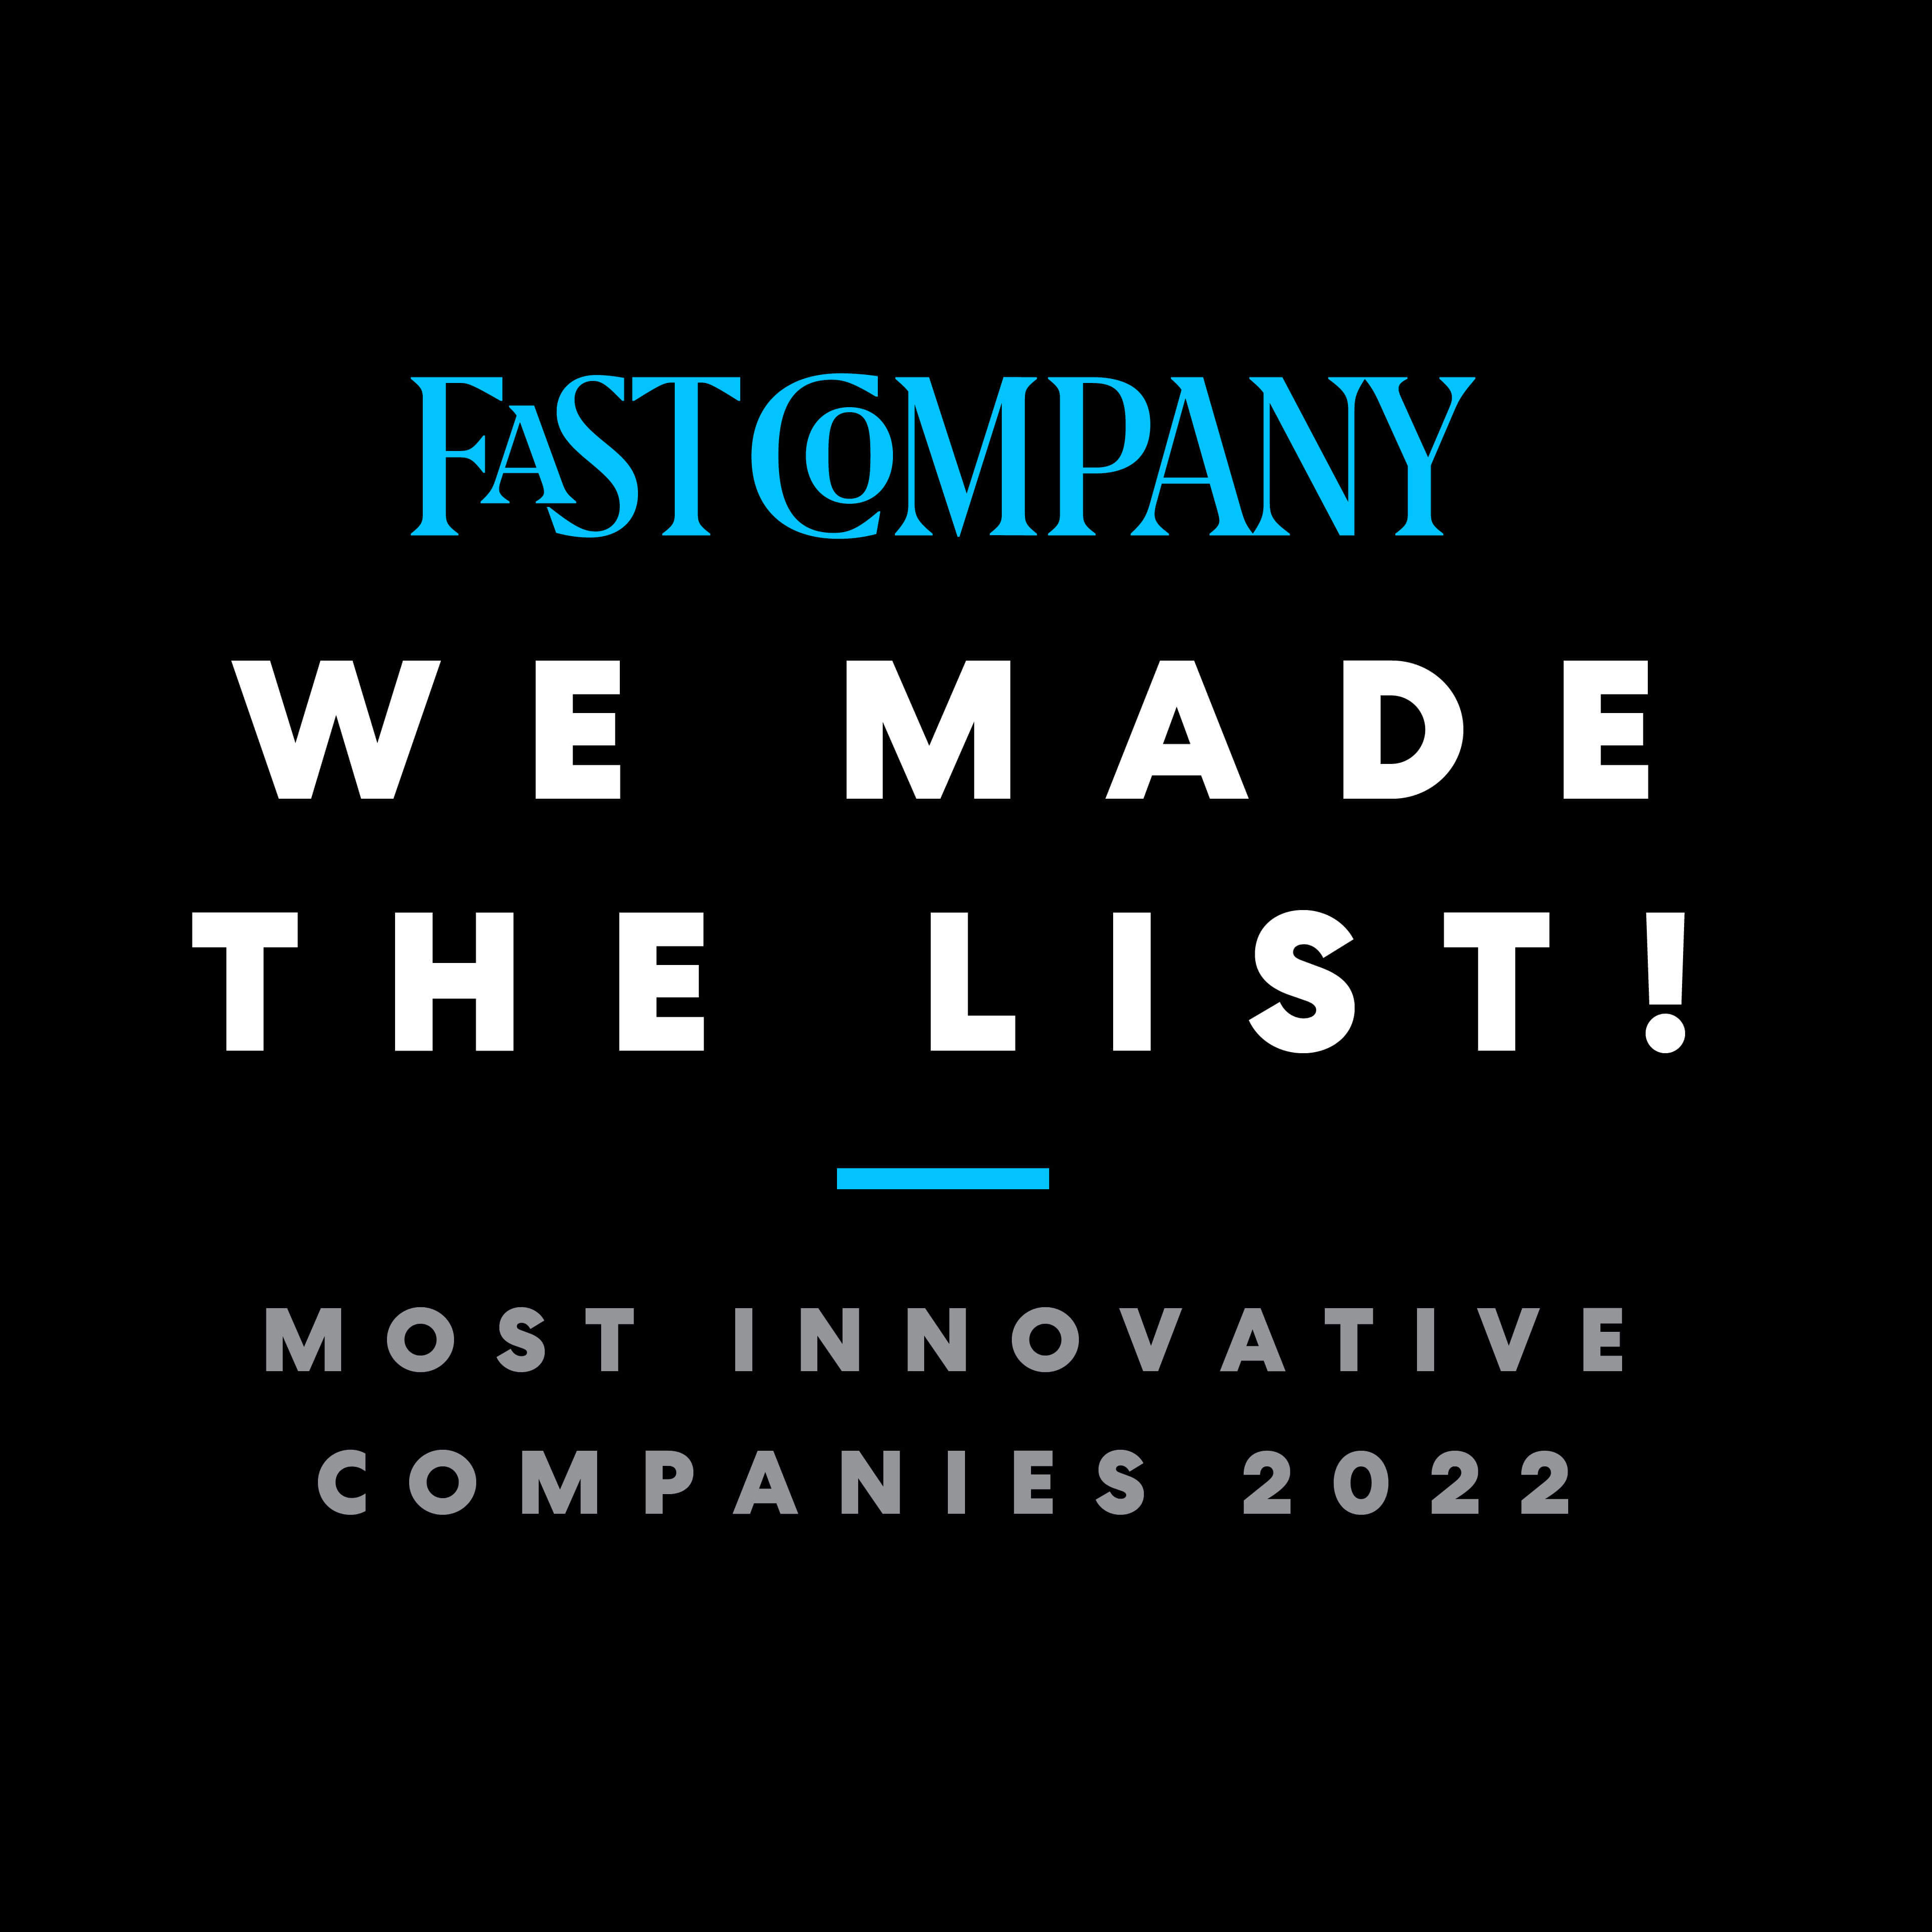 fast company we made the list ! Most Innovative companies 2022